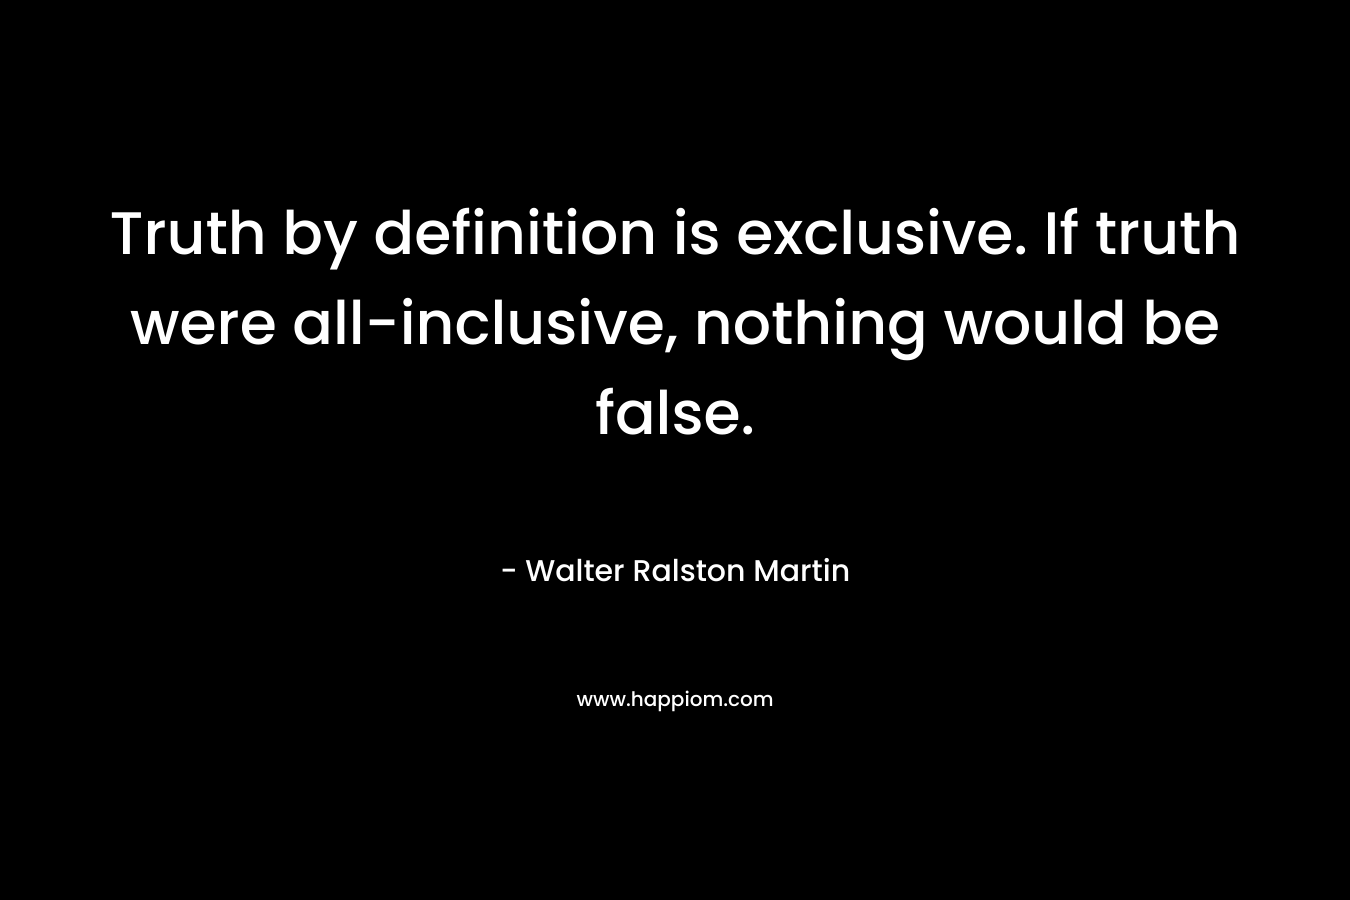 Truth by definition is exclusive. If truth were all-inclusive, nothing would be false. – Walter Ralston Martin